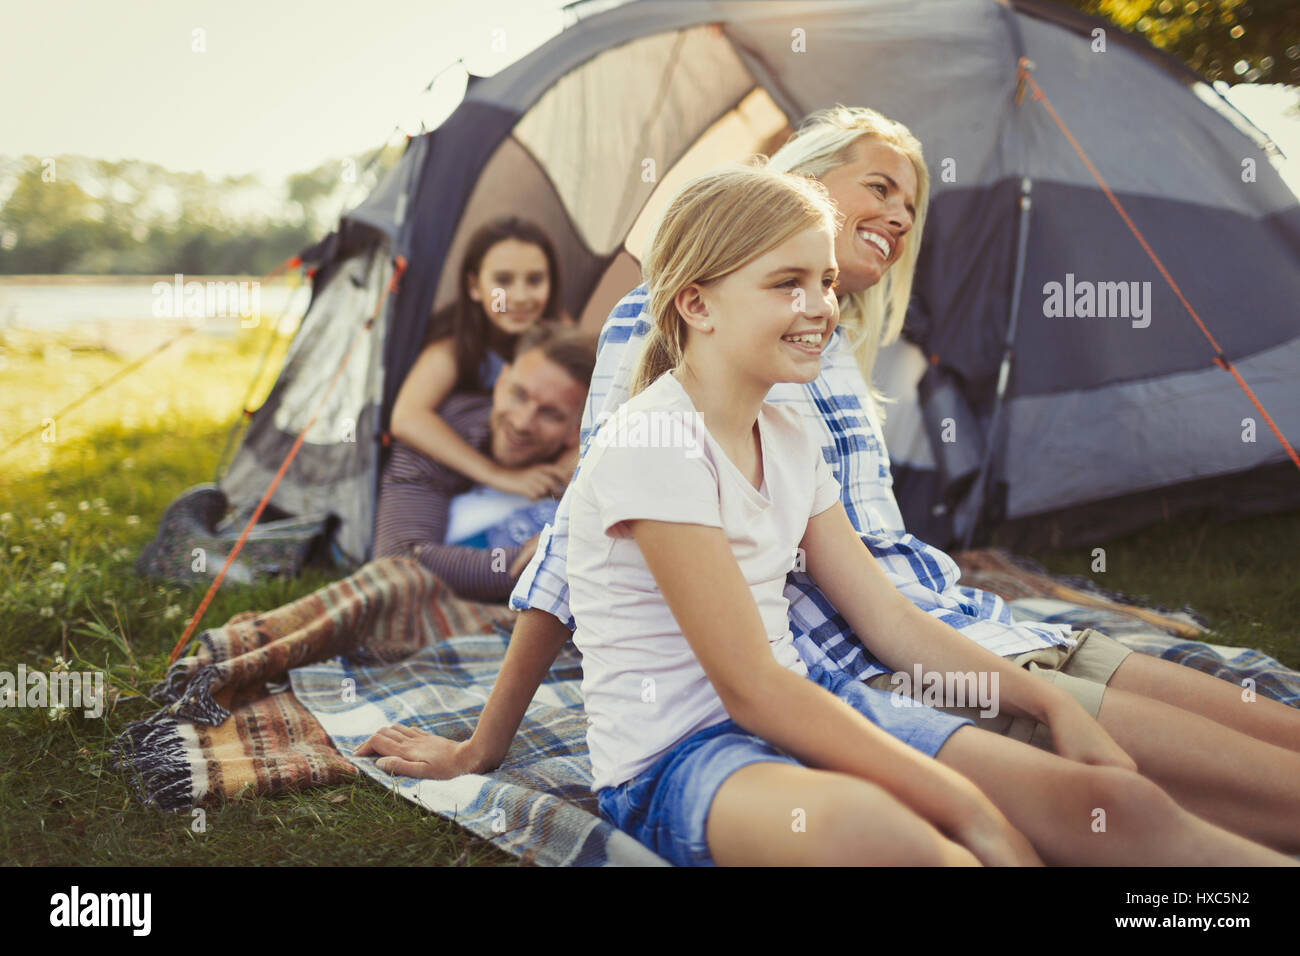 Smiling family relaxing outside campsite tent Stock Photo